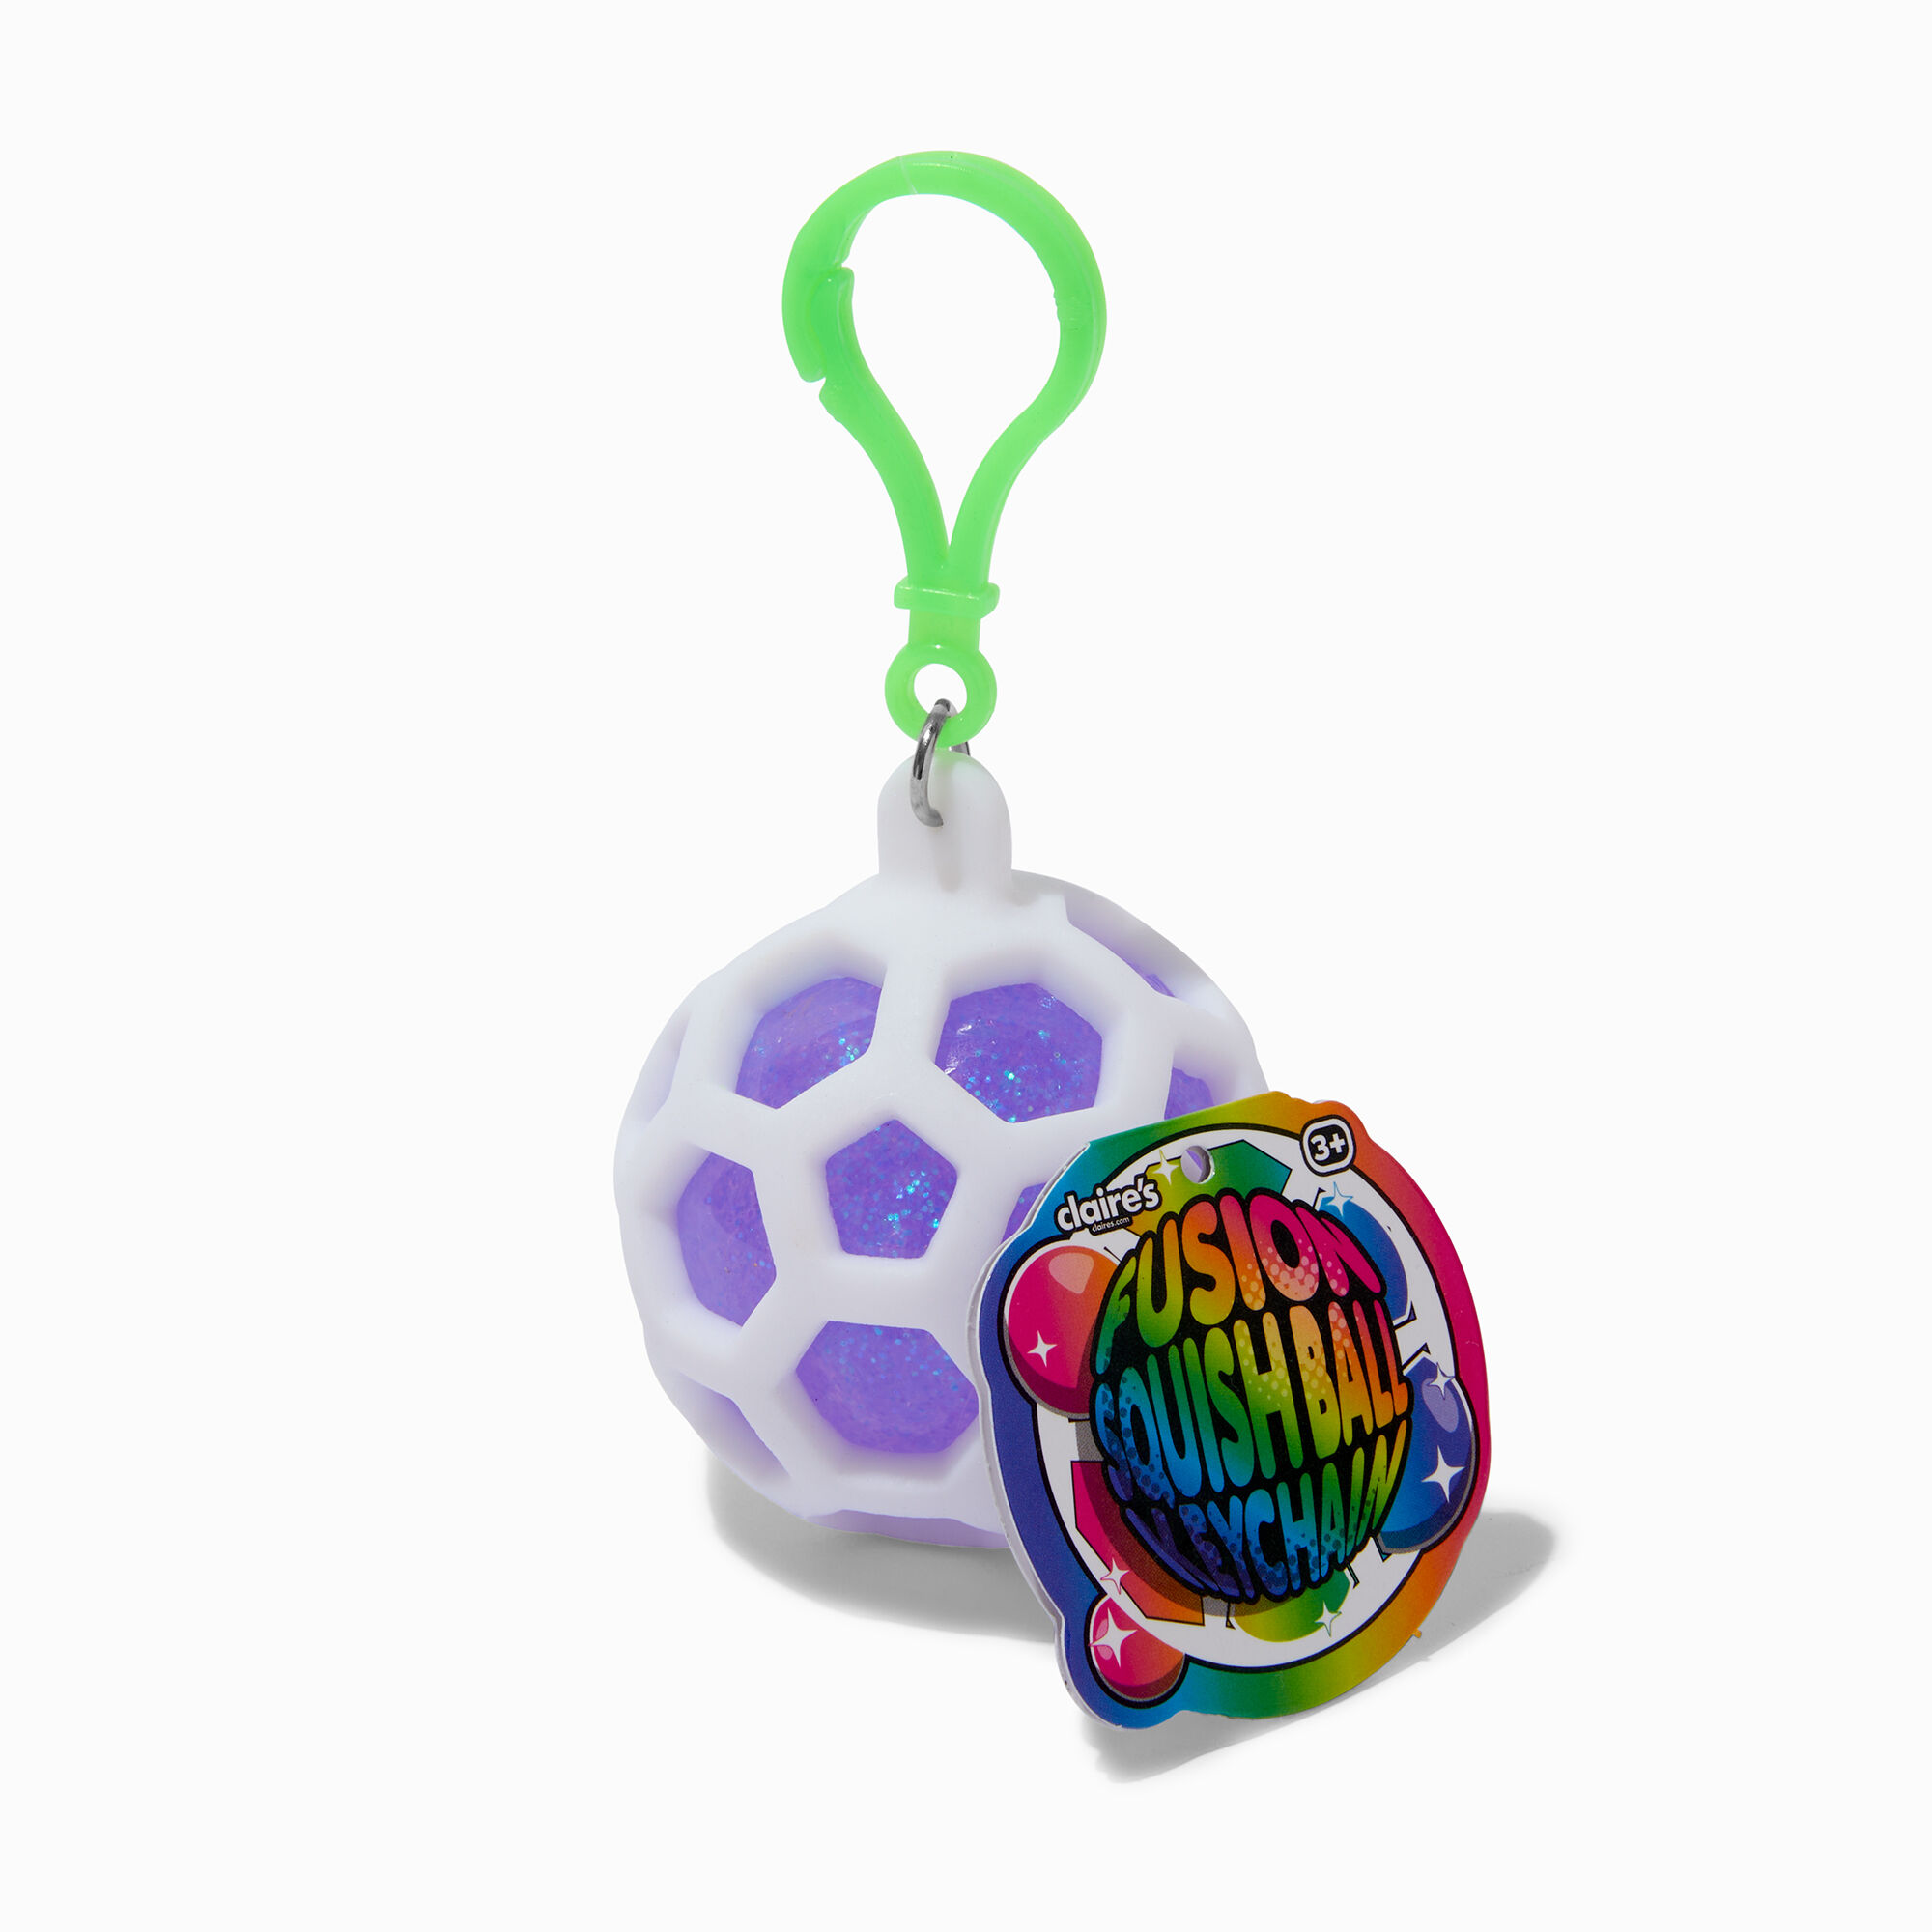 View Claires Fusion Squish Ball Keyring Blind Bag Styles Vary information